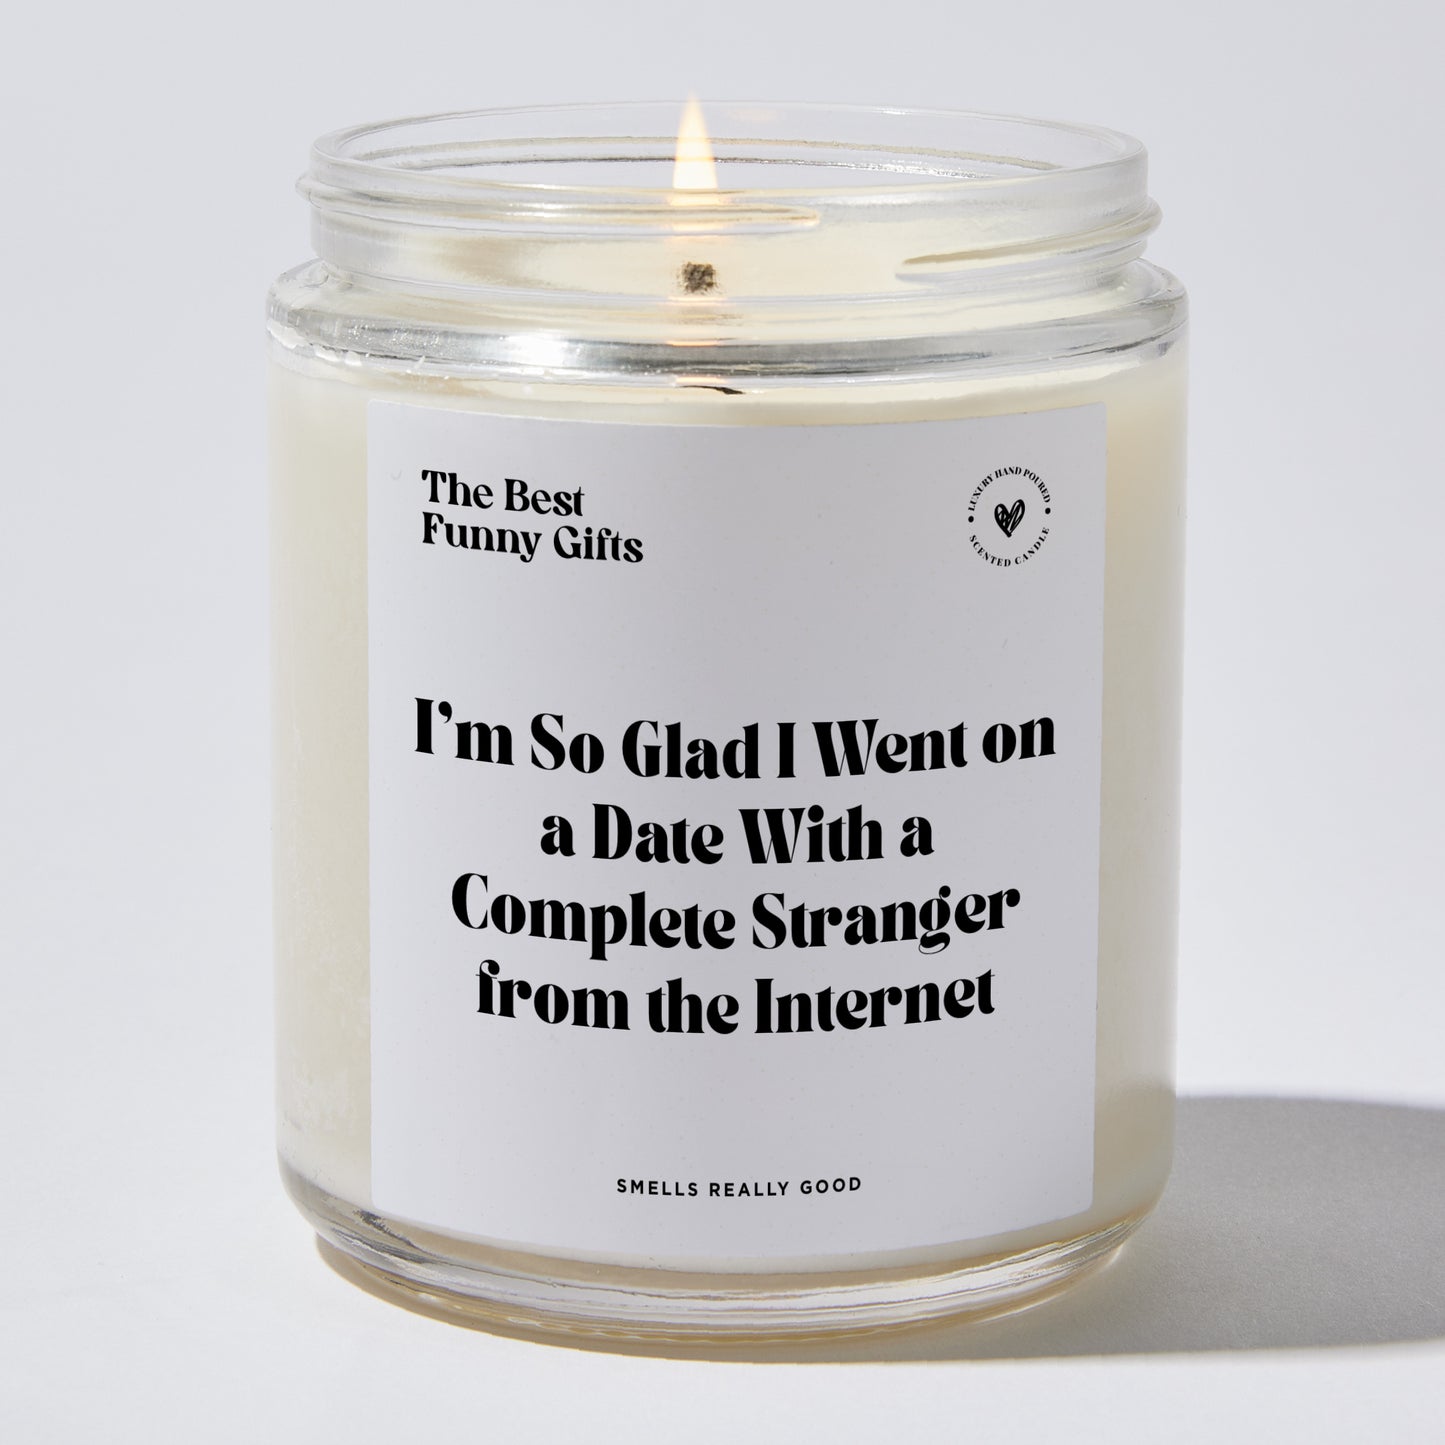 Anniversary Present - I'm So Glad I Went on a Date With a Complete Stranger From the Internet - Candle